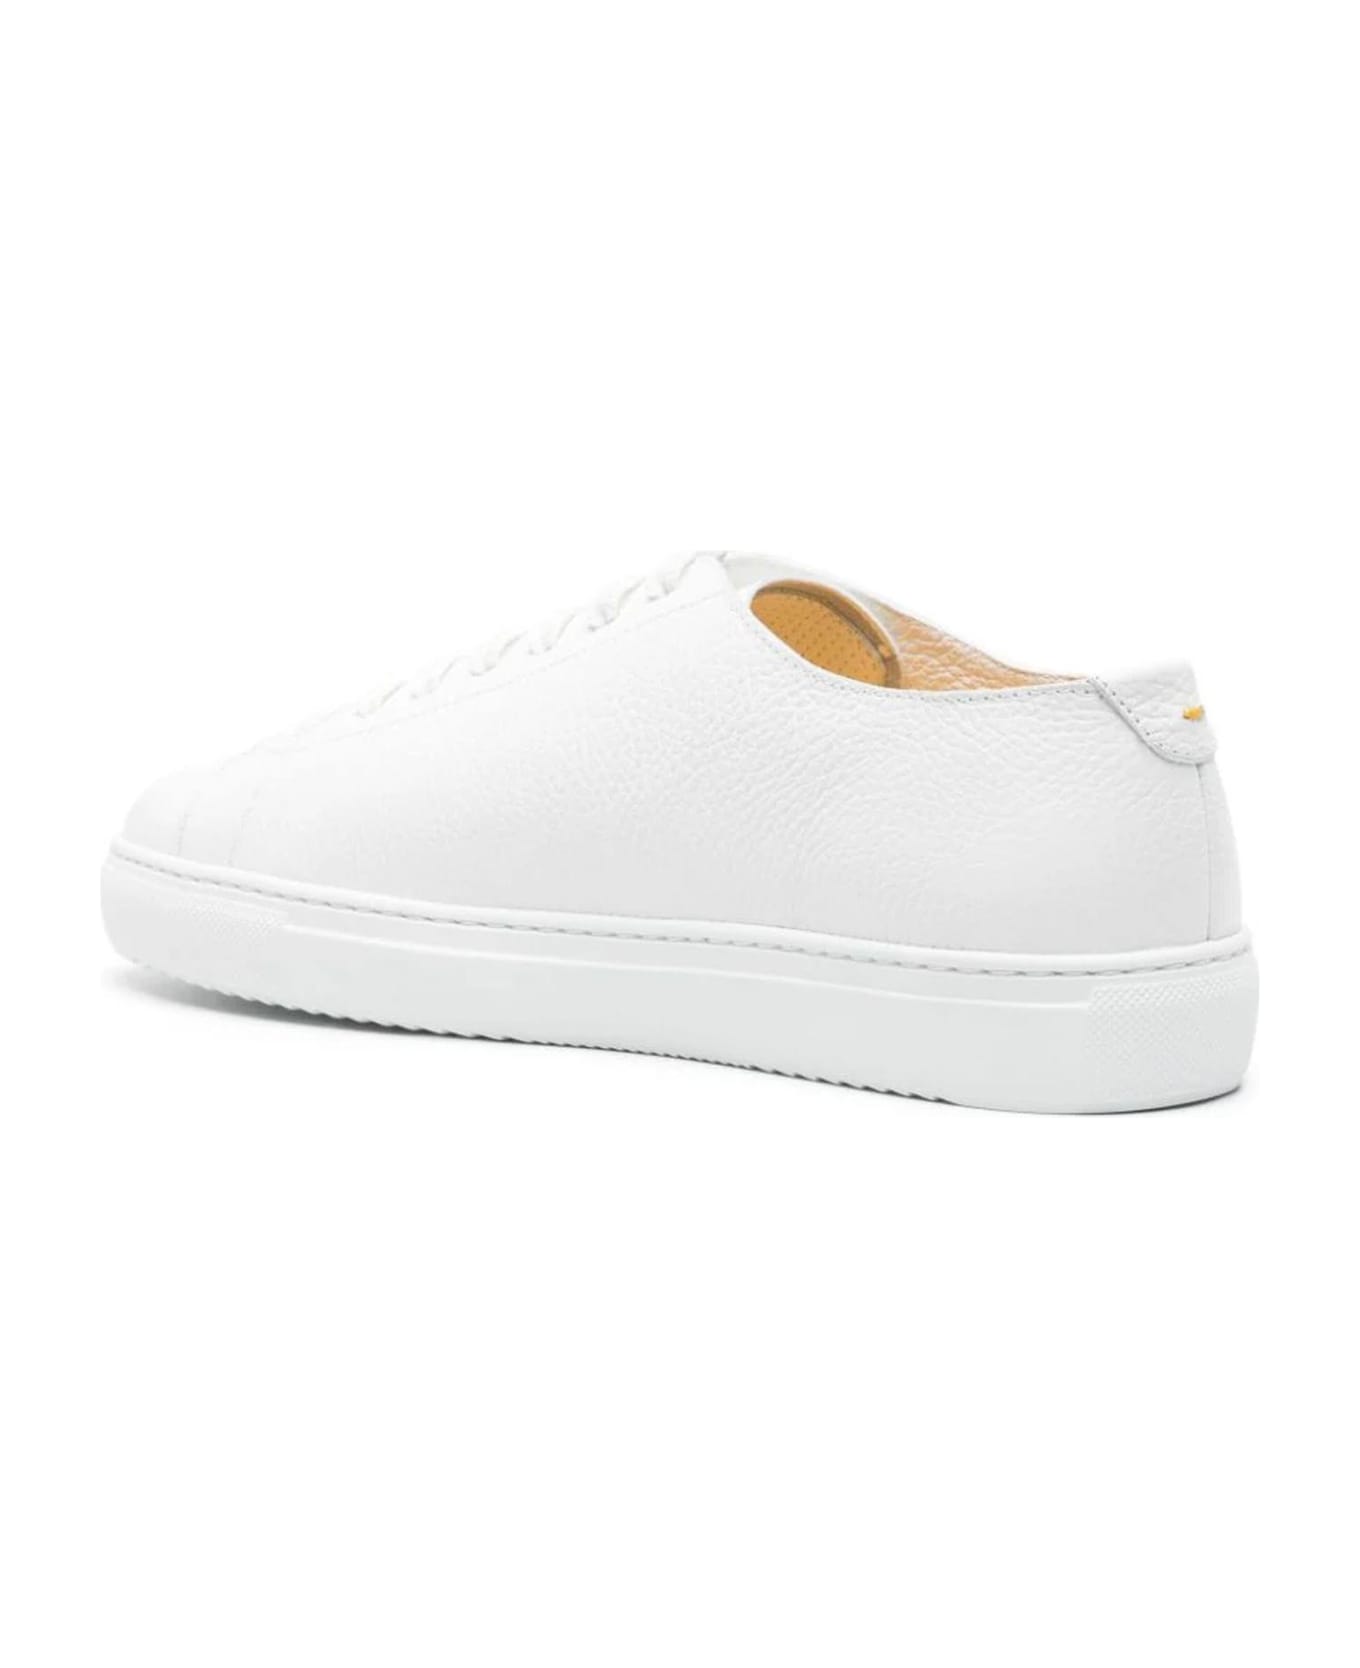 Doucal's White Calf Leather Sneakers - Bianco スニーカー